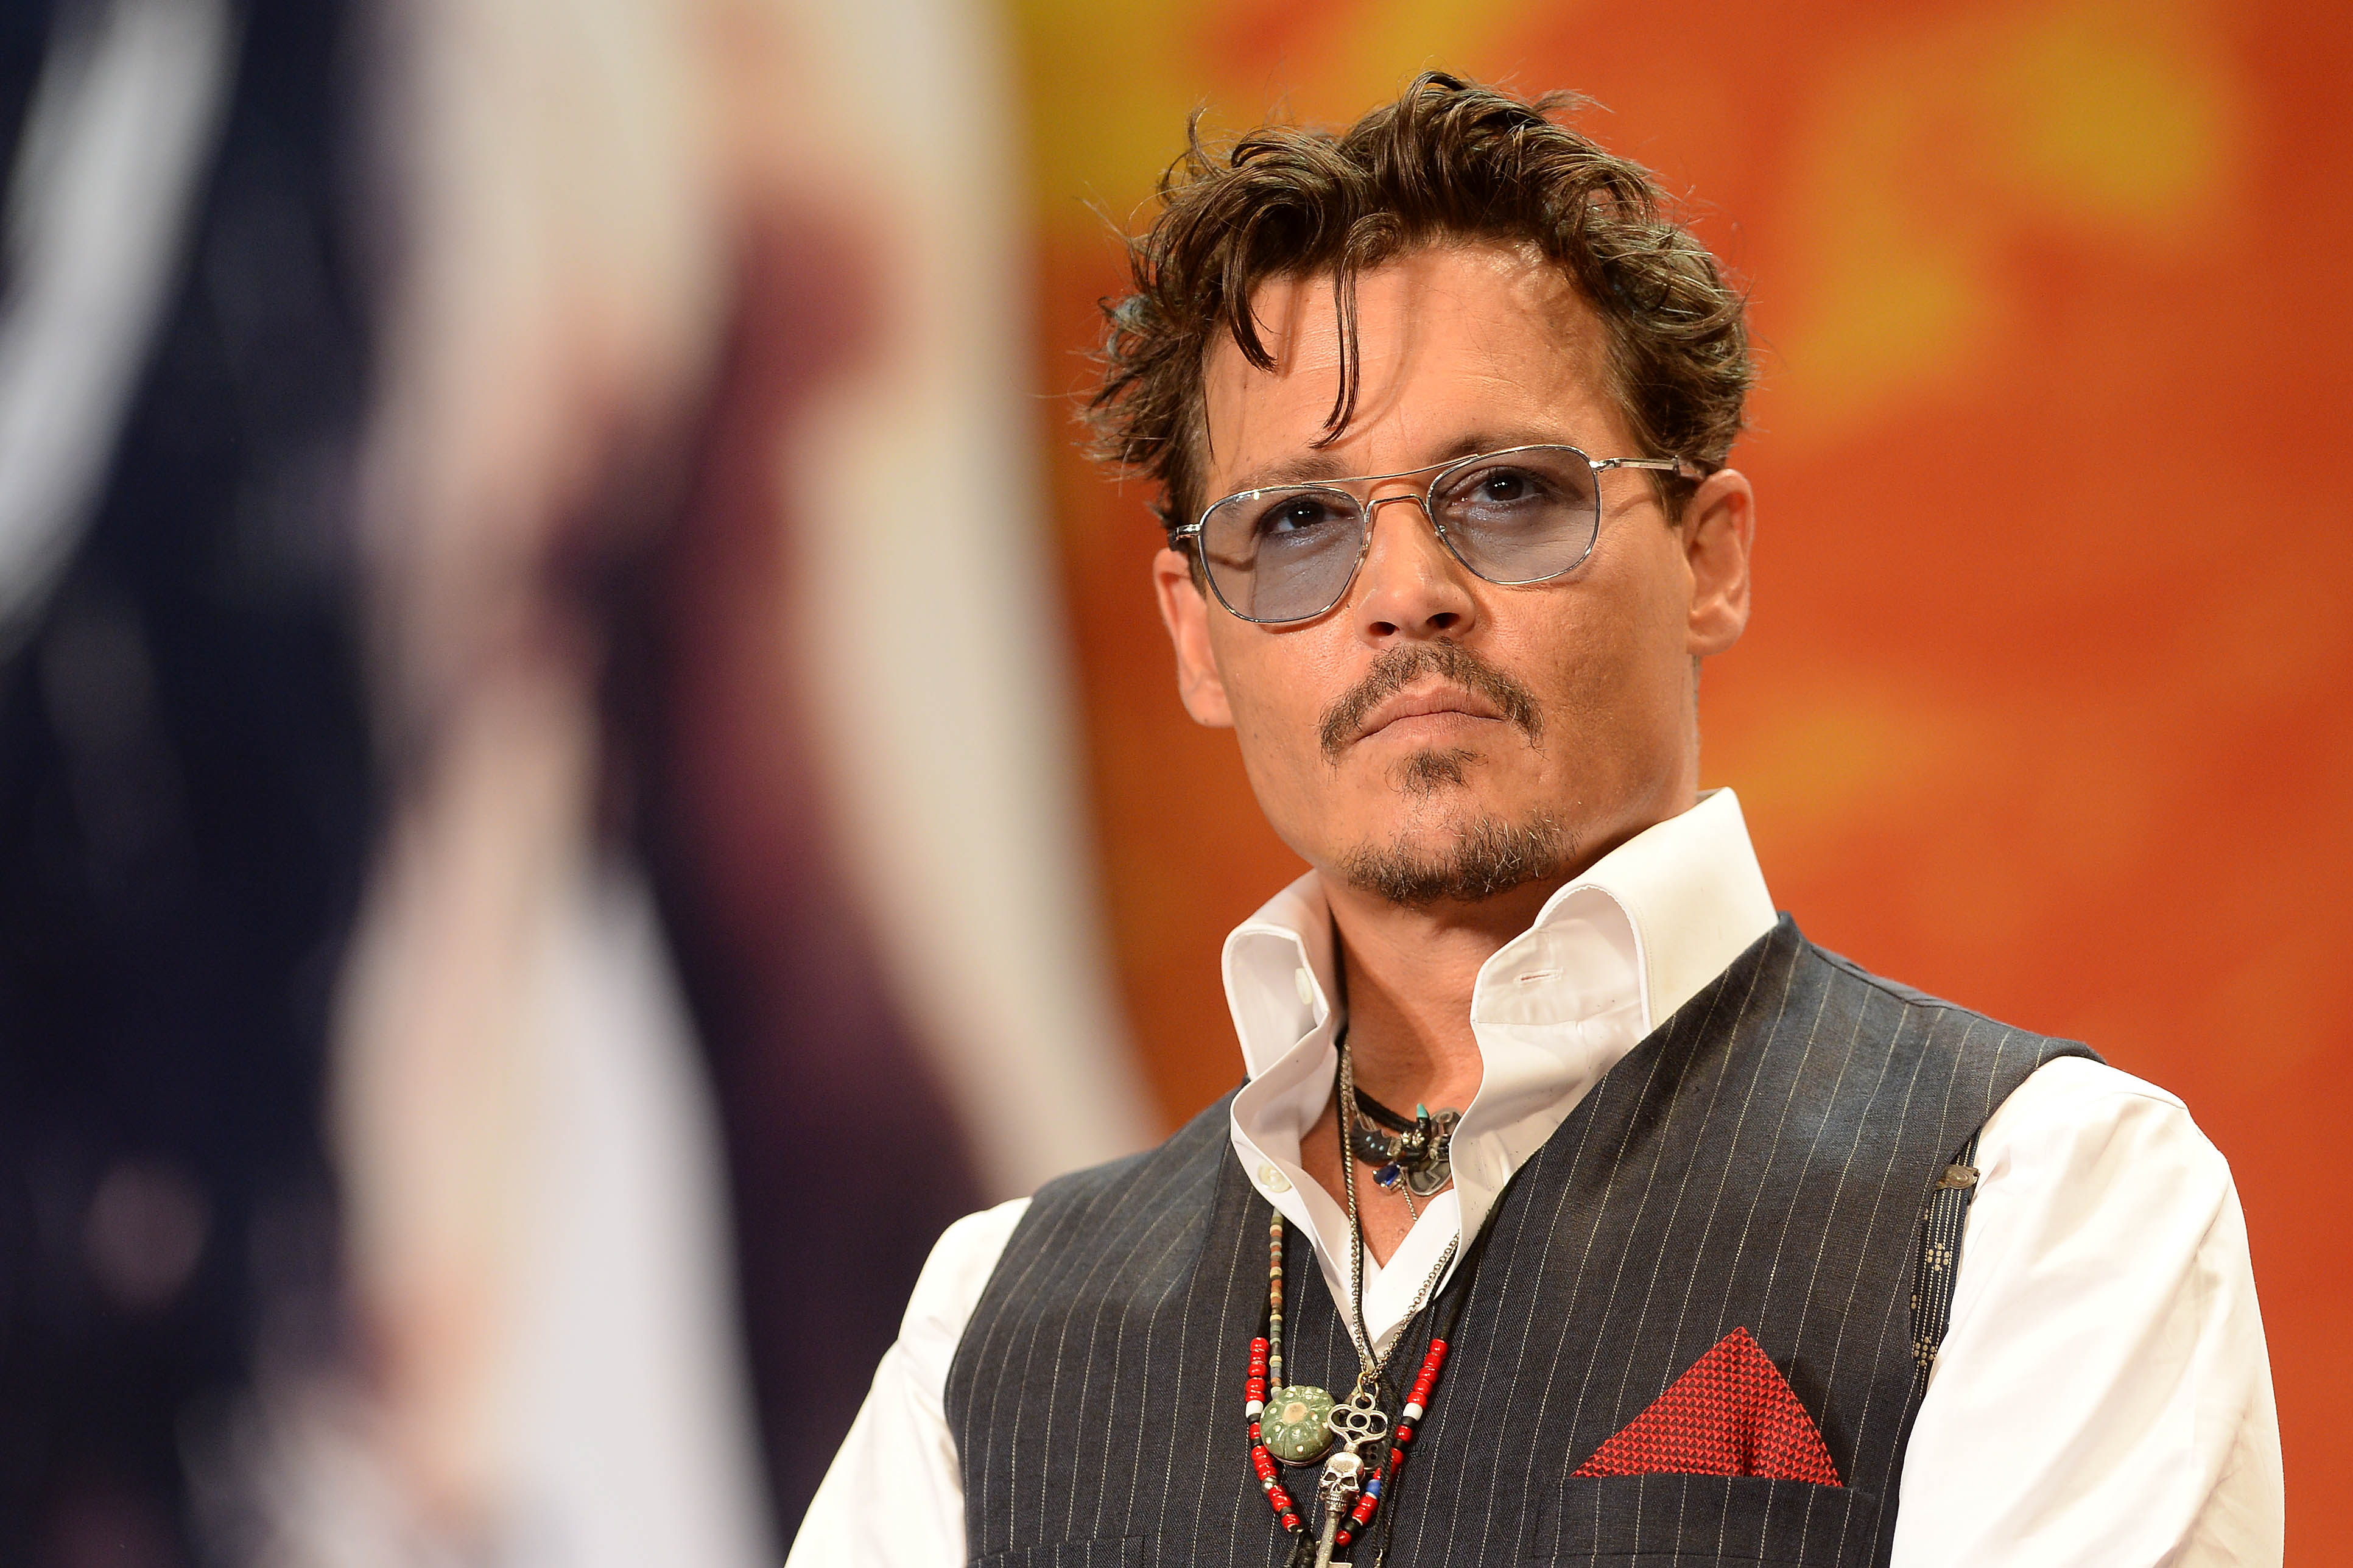 Johnny Depp lost libel battle against publisher of ‘The Sun’ newspaper over an article that claimed he was a ‘wife beater'